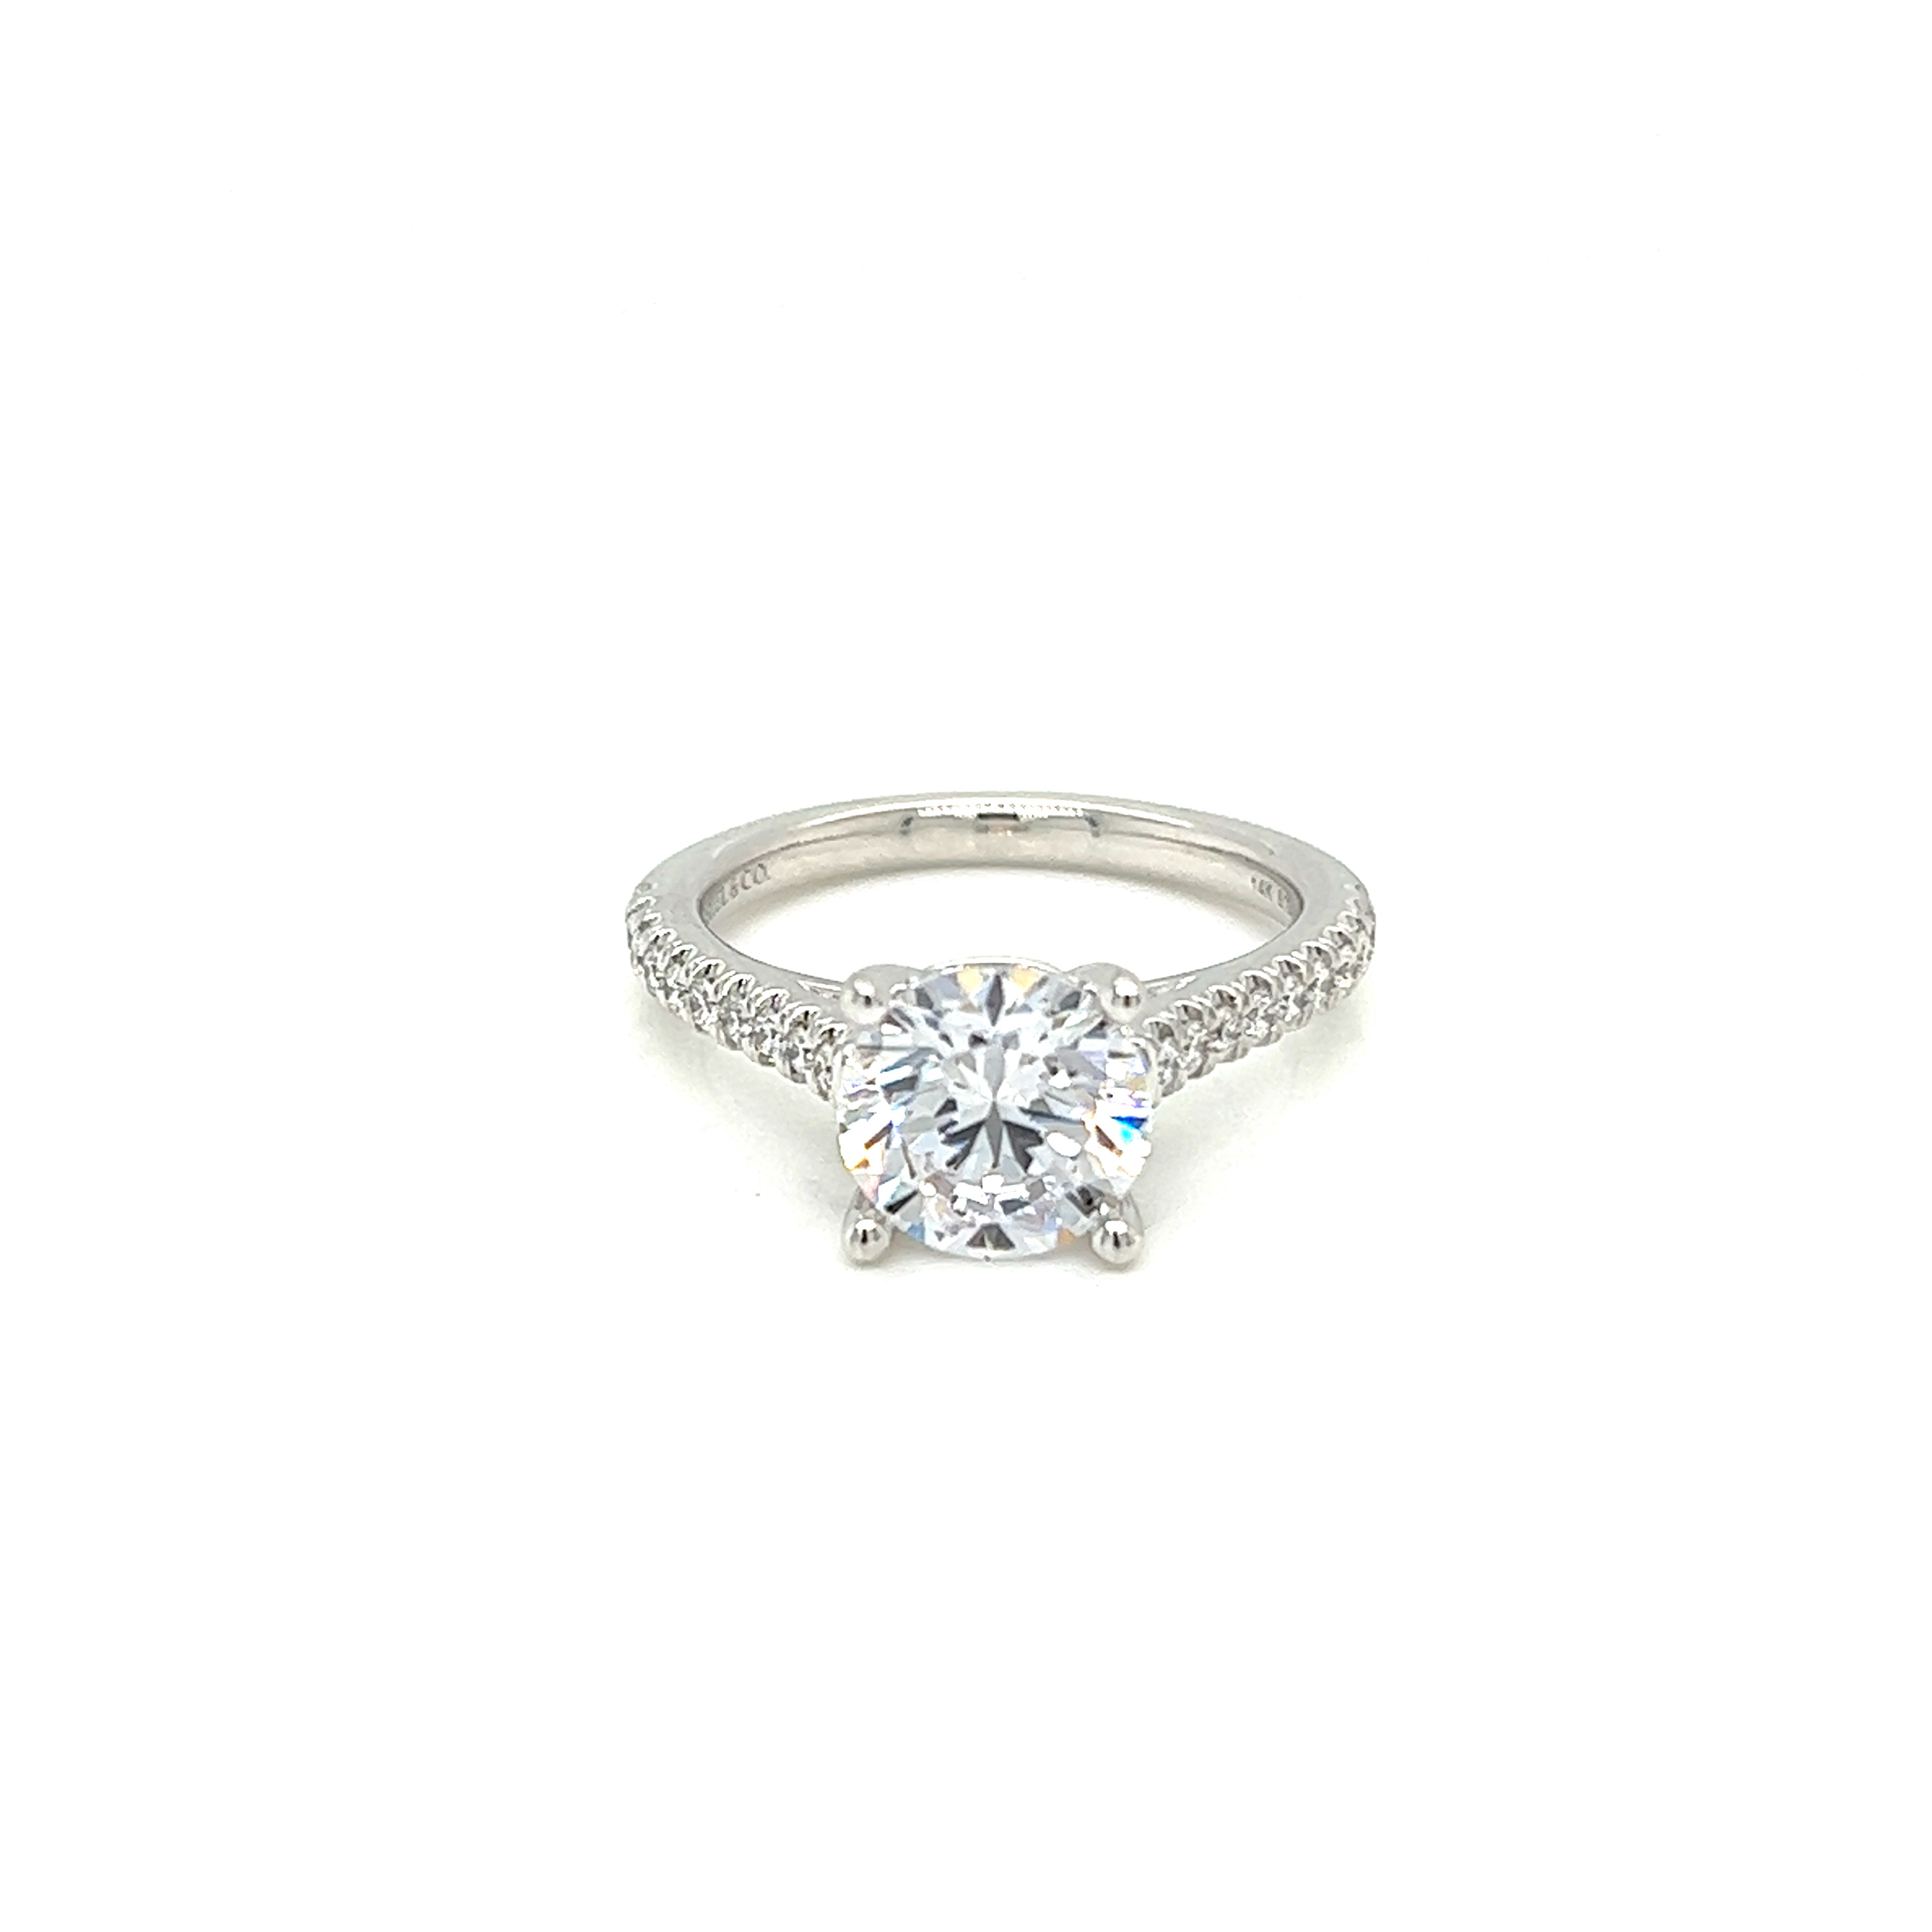 14 Karat white gold semi mount engagement ring Size 6.5 with 0.24 total weight round vrilliant G VS Diamonds